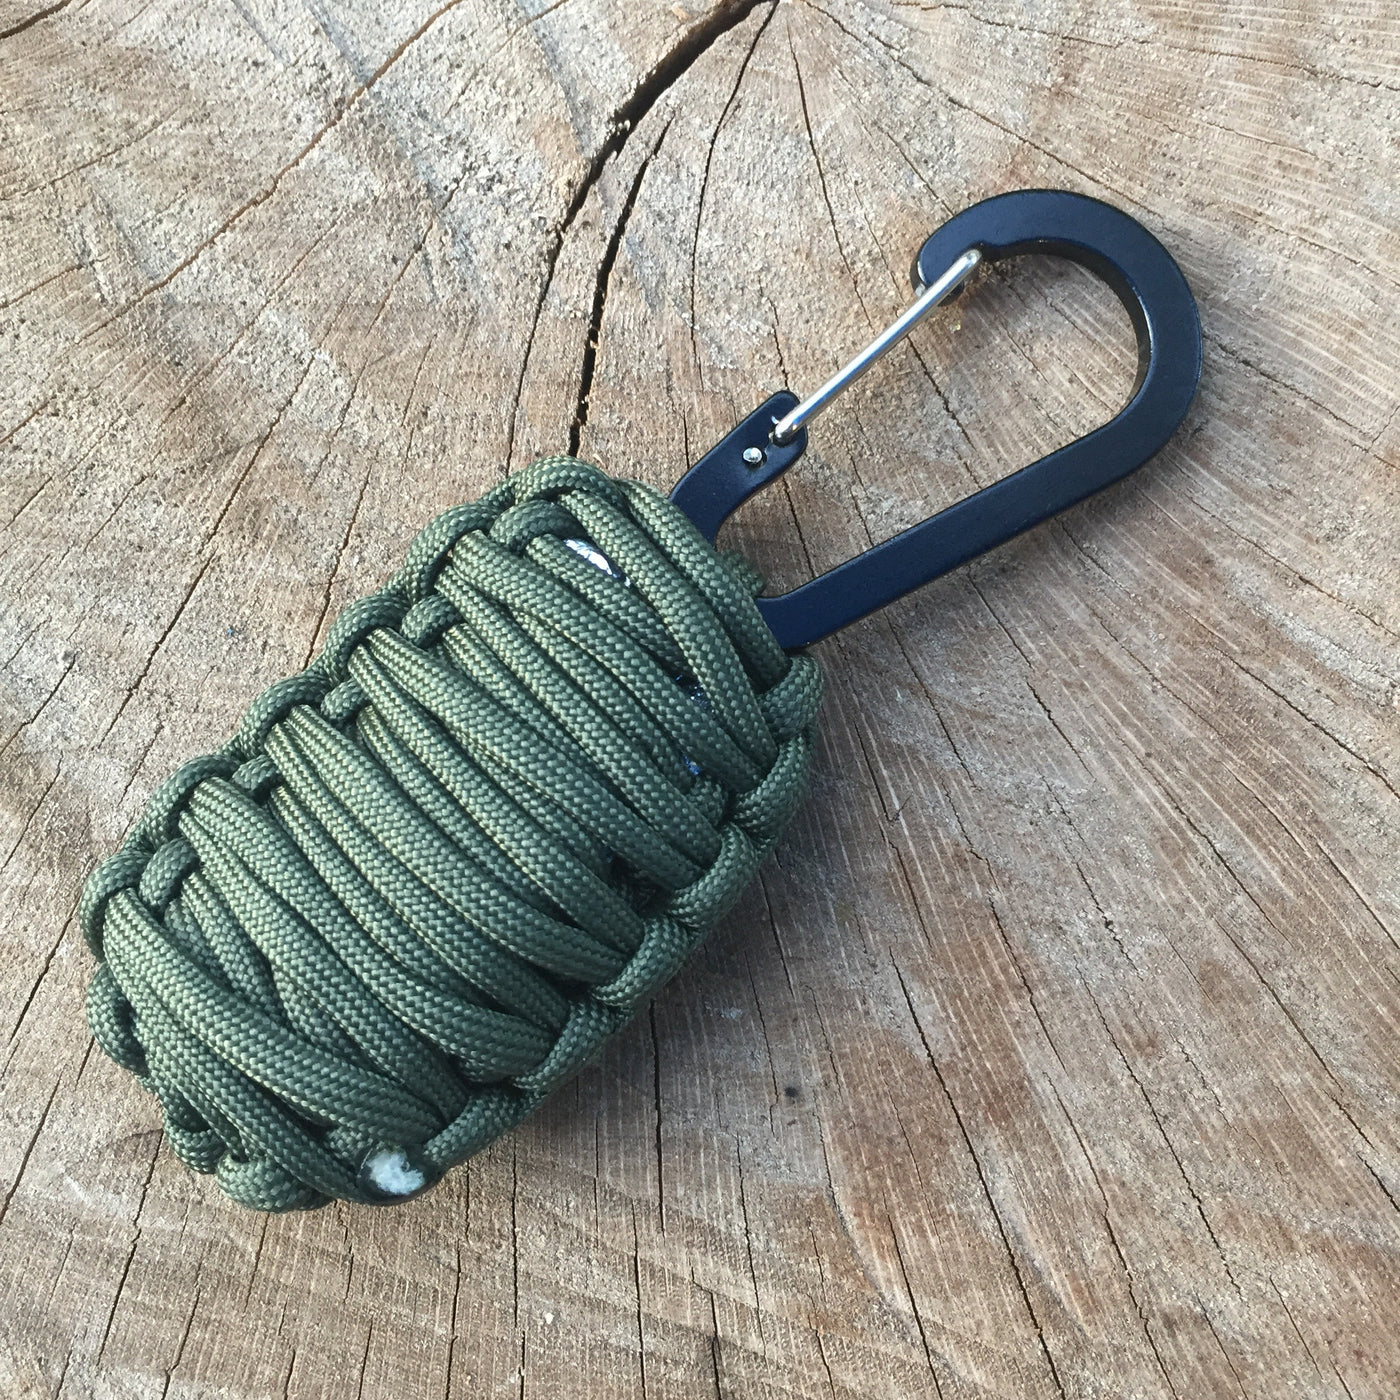 The Paracord Grenade - clip-on survival kit